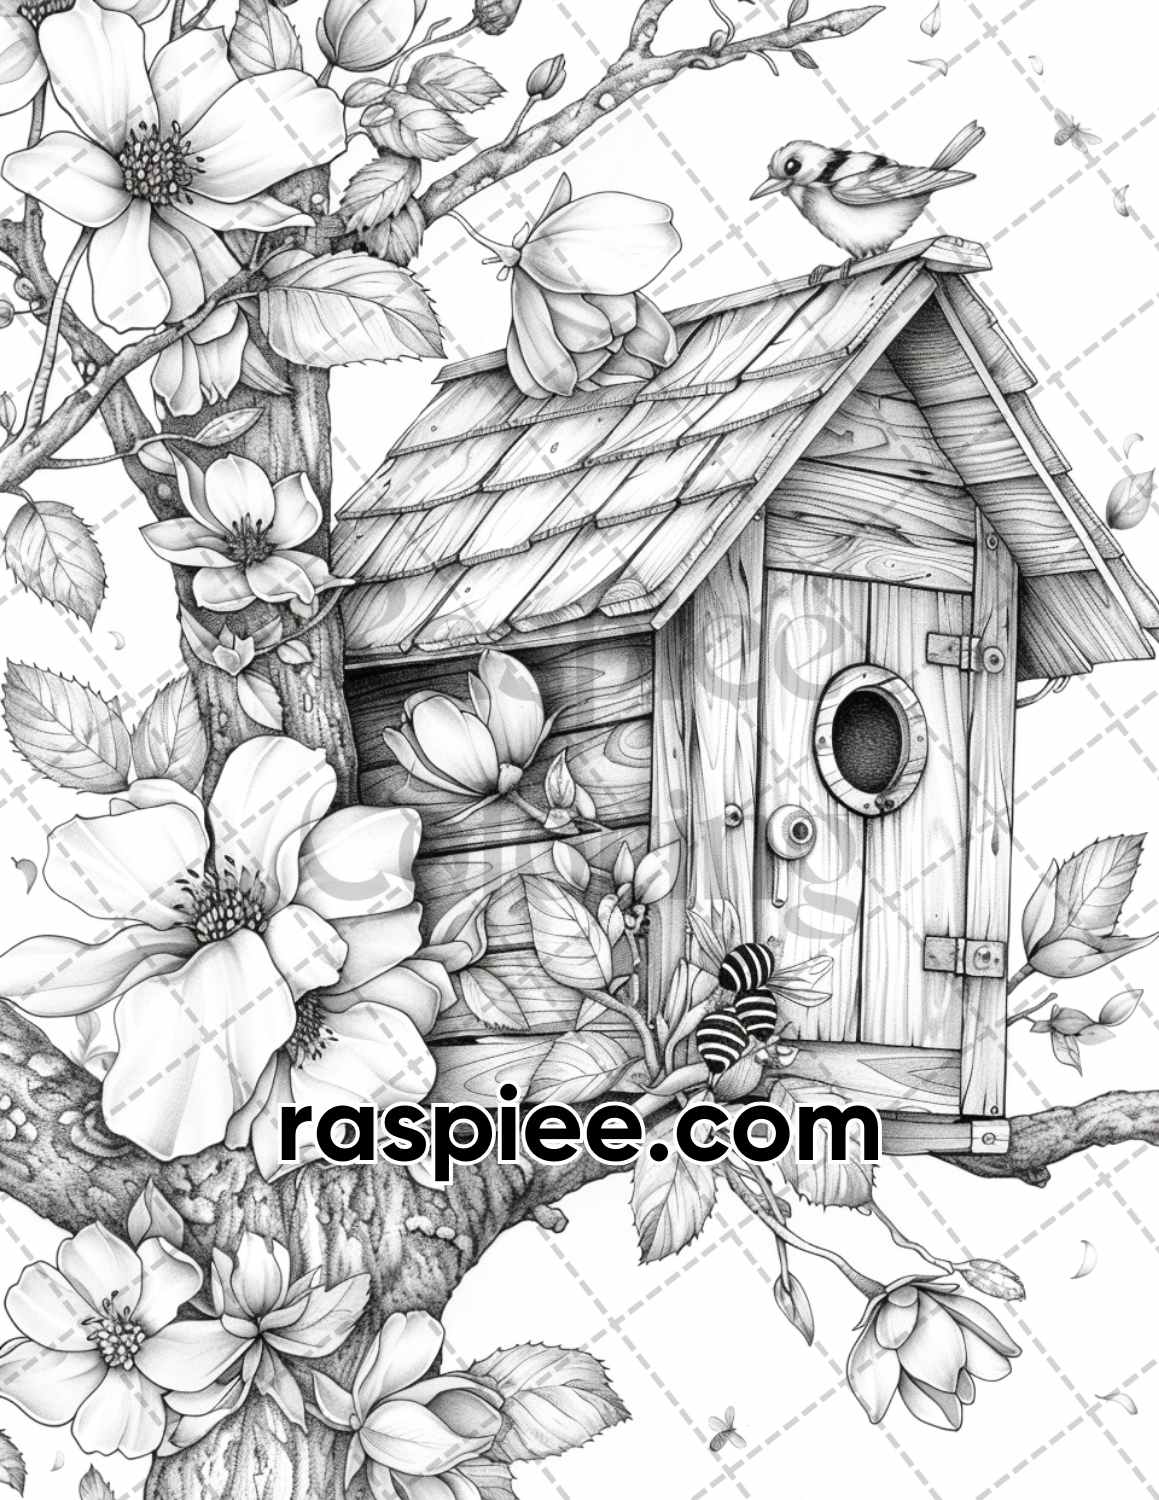 adult coloring pages, adult coloring sheets, adult coloring book pdf, adult coloring book printable, grayscale coloring pages, grayscale coloring books, birdhouse coloring pages for adults, birdhouse coloring book, grayscale illustration, summer coloring pages, animal coloring pages, spring coloring pages